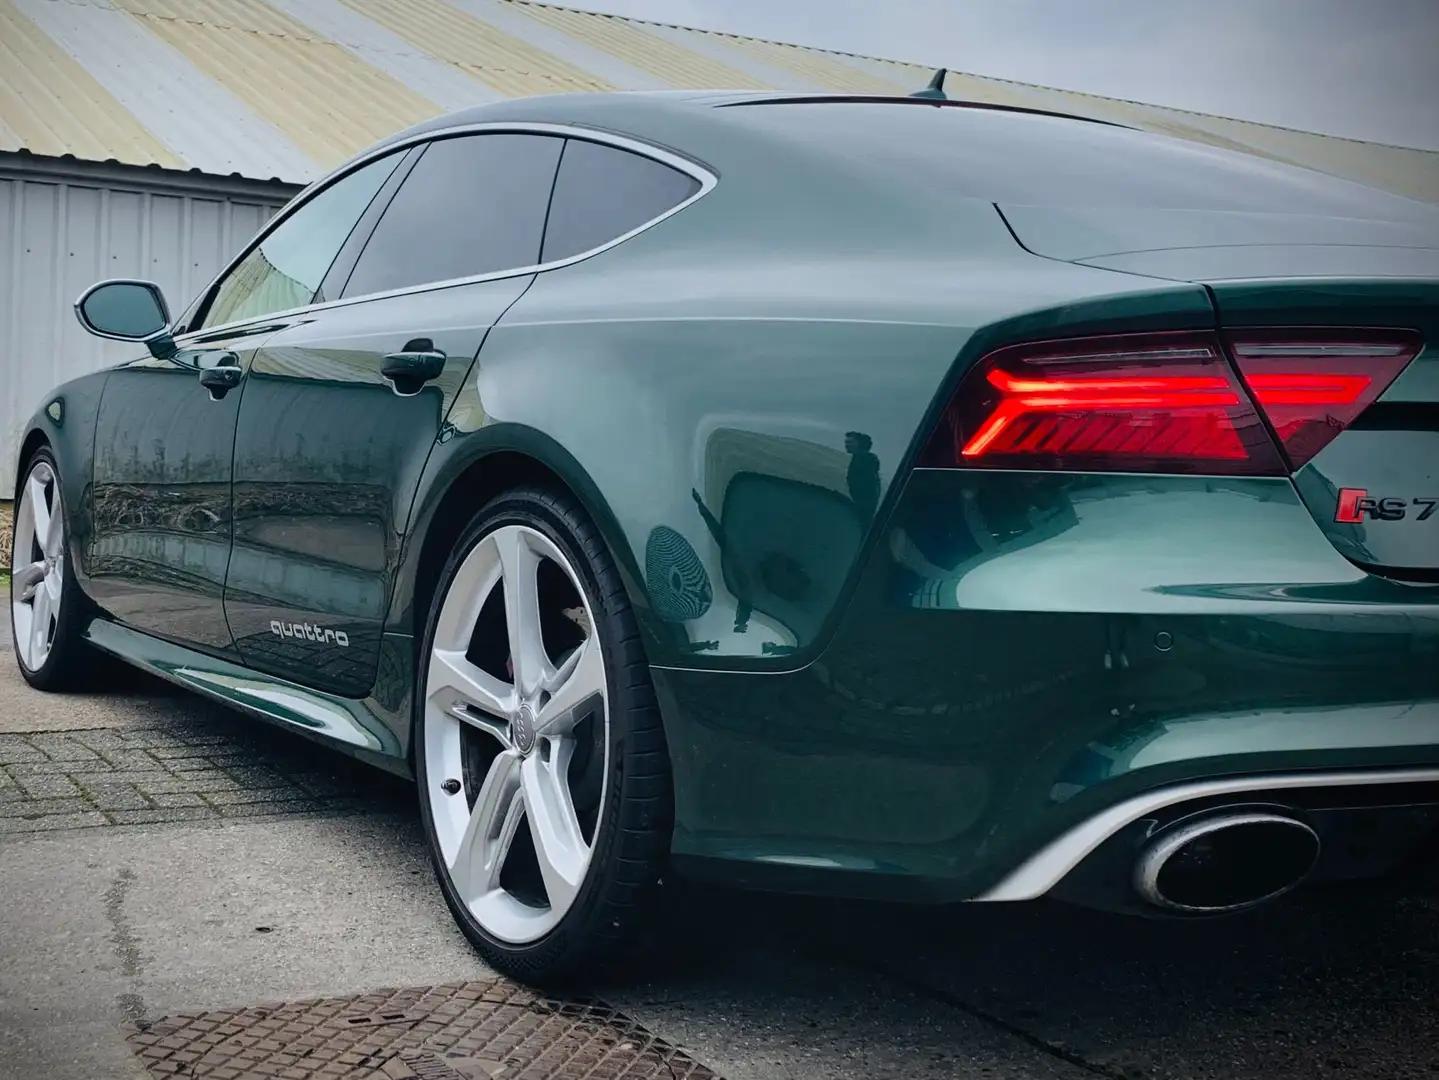 Audi RS7 Verdant Green - Audi Exclusive - from collector Verde - 2